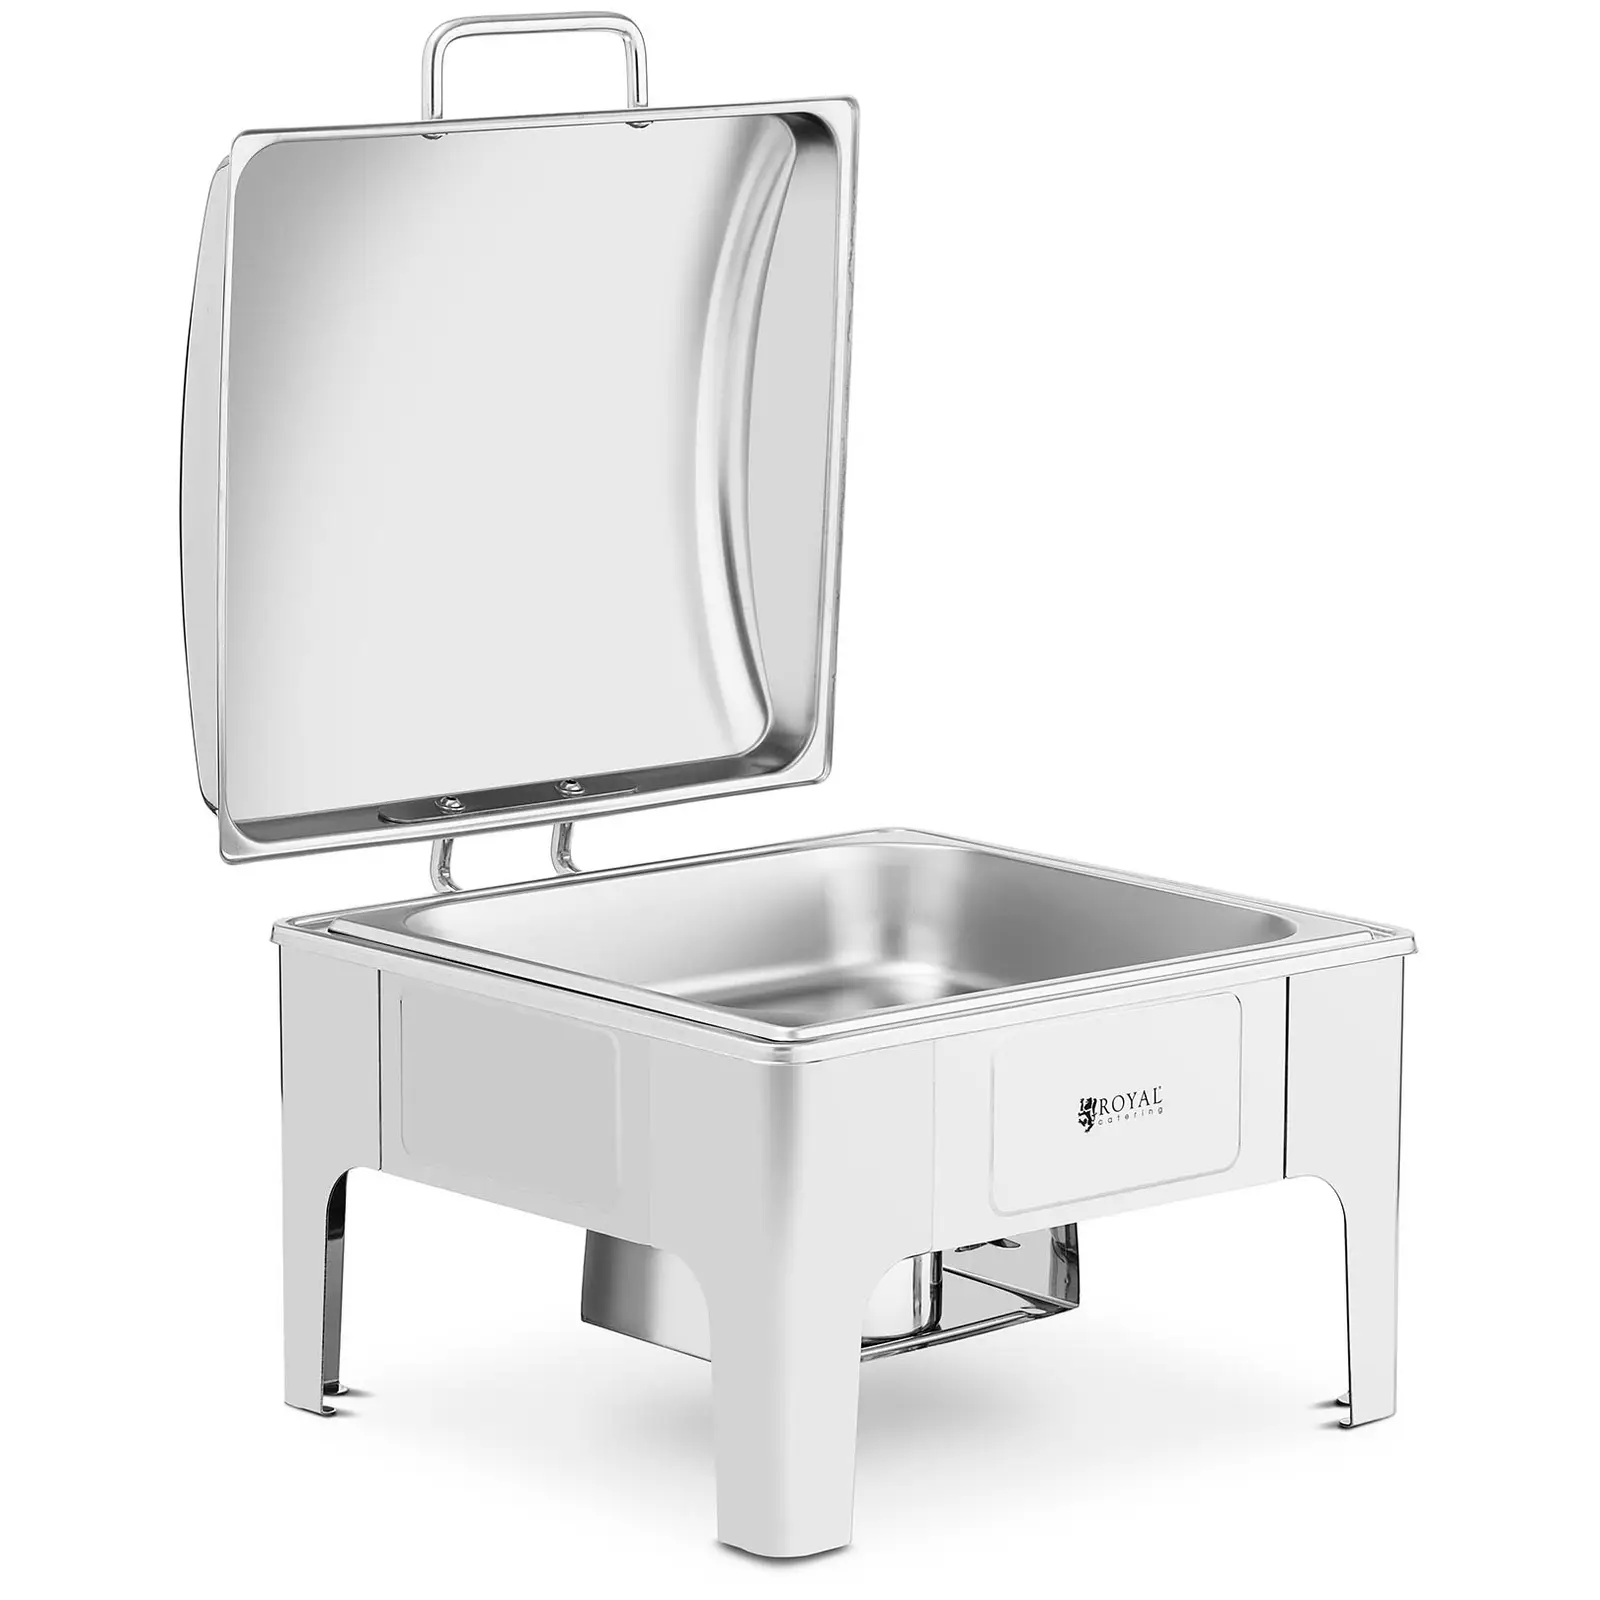 Chafing Dish - GN 2/3 - Royal Catering - 5,3 L - 1 contenedor de combustible - semicilíndrico